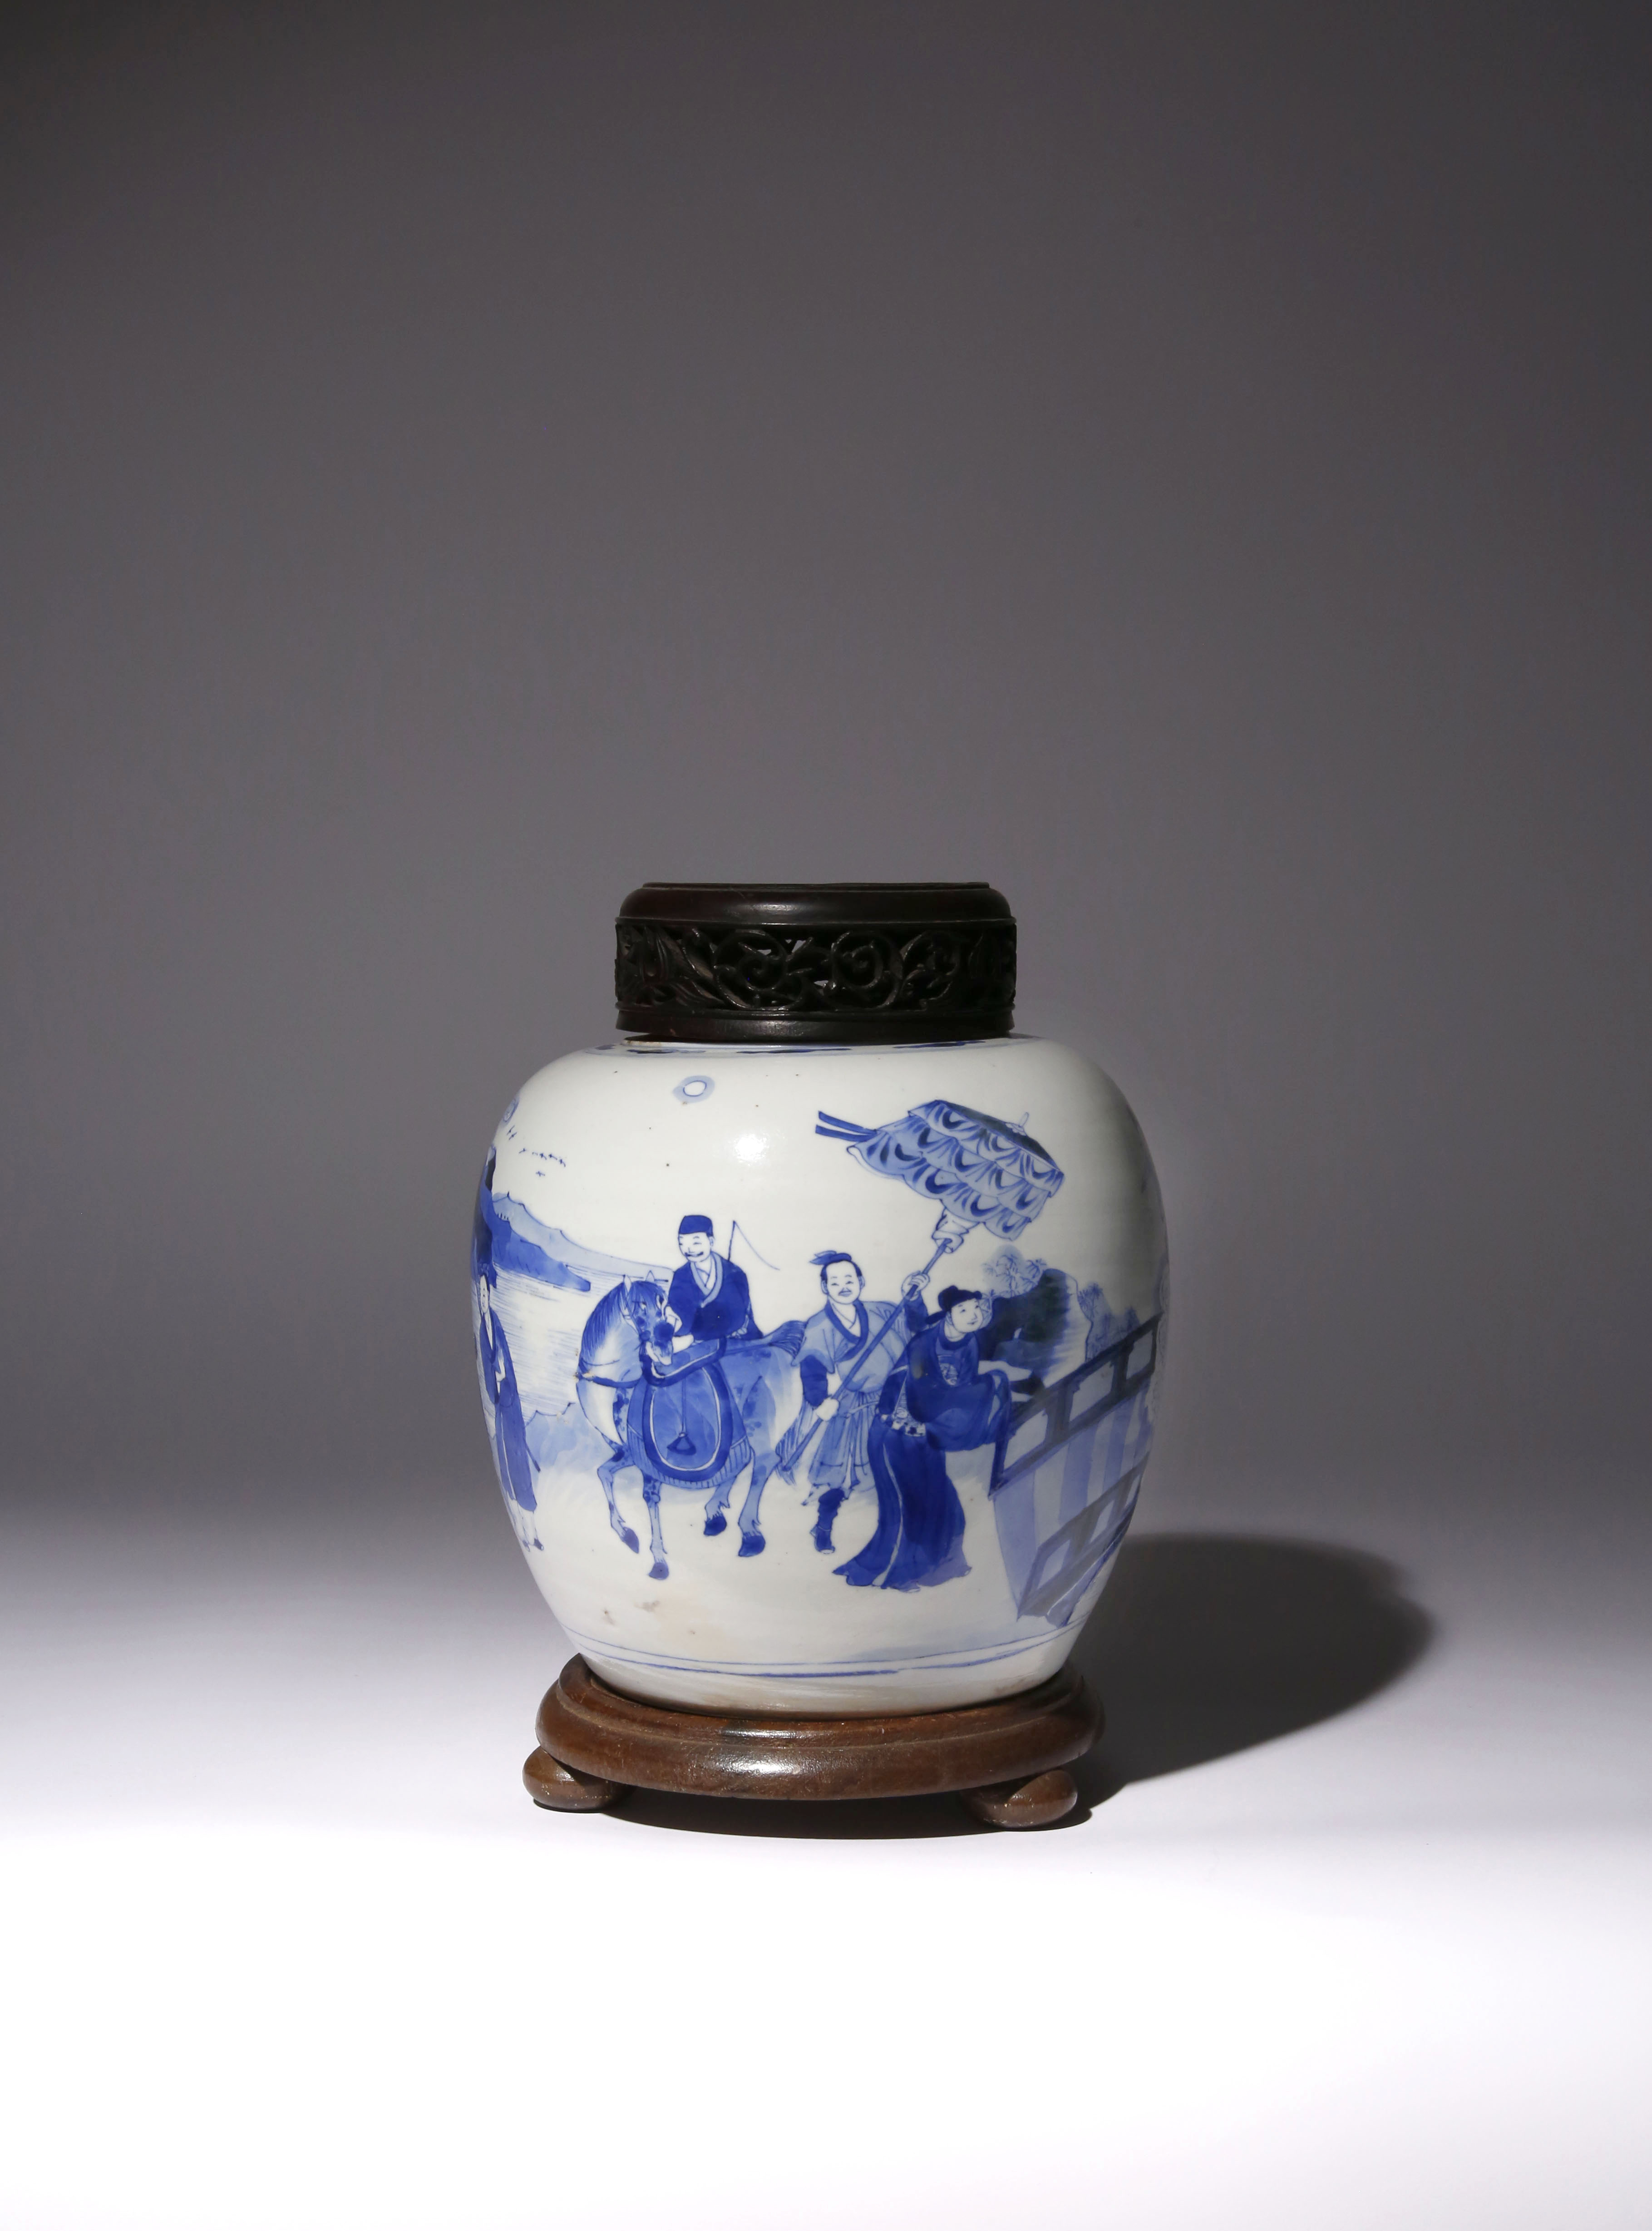 A CHINESE BLUE AND WHITE OVOID VASE KANGXI 1662-1722 Brightly painted in light and dark tones with